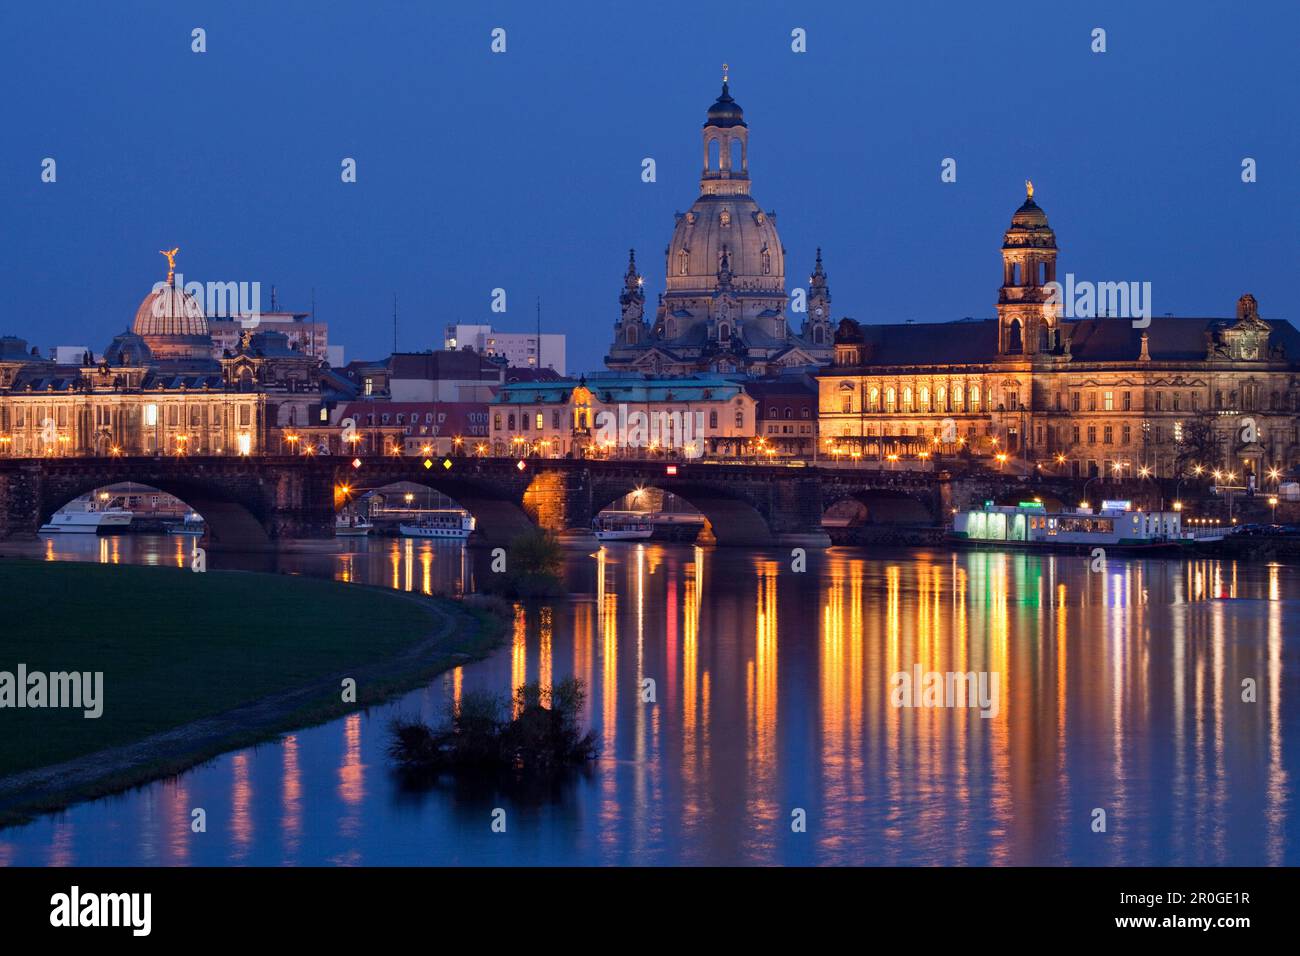 Evening view of the city with the Elbe River, Augustus Bridge, Lipsius-Bau, Frauenkirche, Church of our Lady, Brühl´s Palais, Brühl´s Terrace, Ständeh Stock Photo